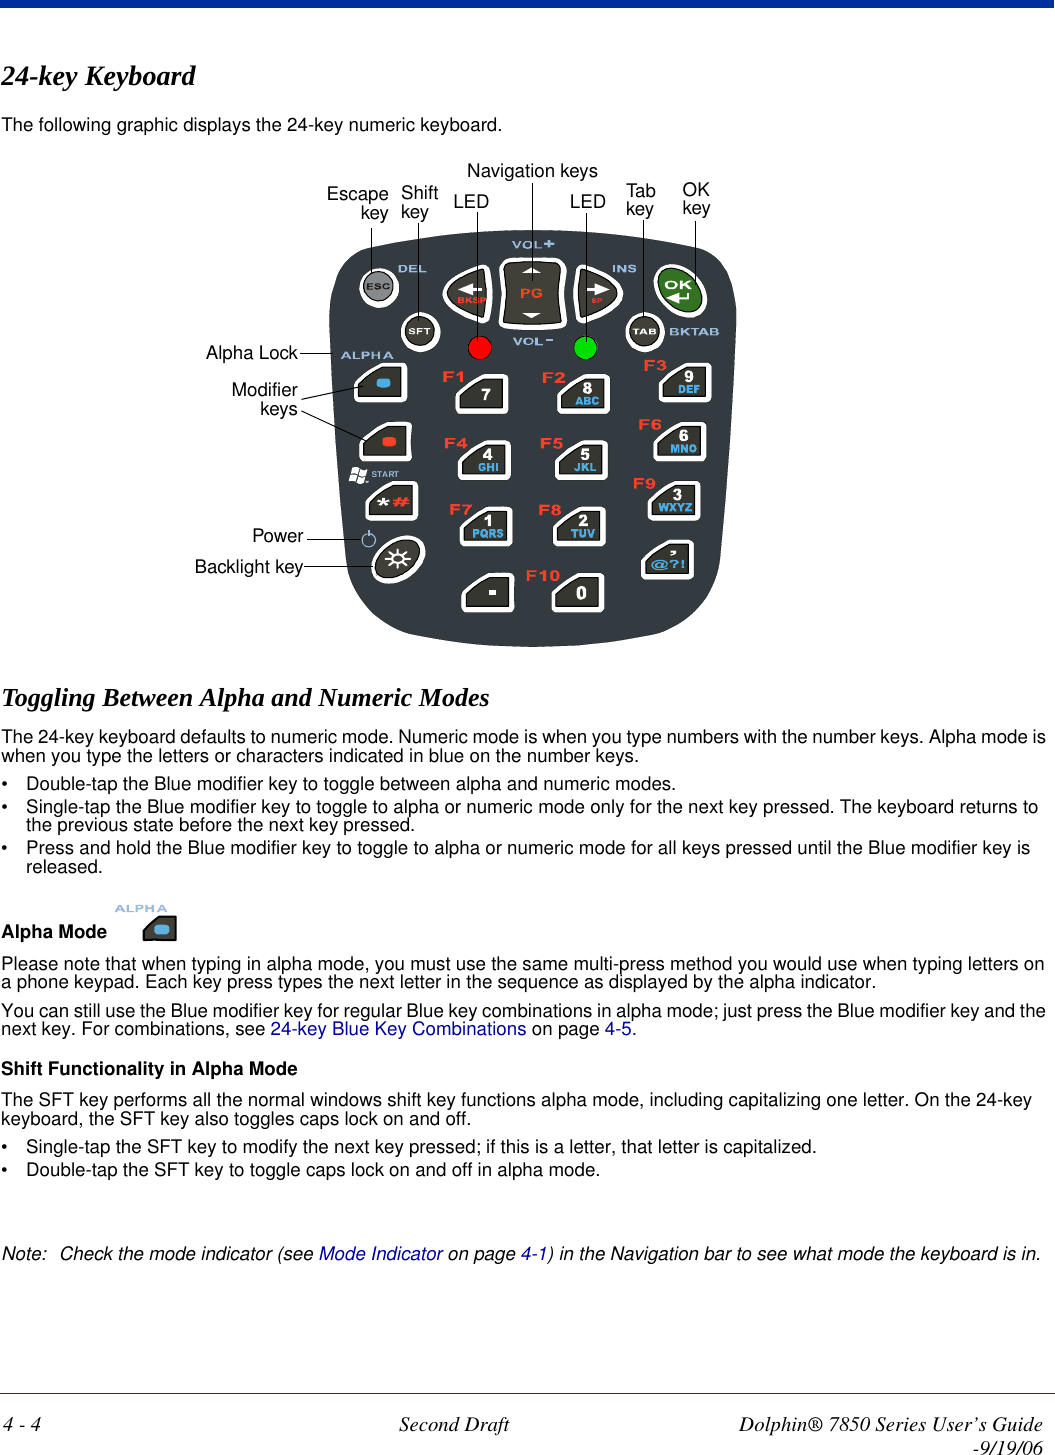 4 - 4 Second Draft Dolphin® 7850 Series User’s Guide-9/19/0624-key KeyboardThe following graphic displays the 24-key numeric keyboard.Toggling Between Alpha and Numeric ModesThe 24-key keyboard defaults to numeric mode. Numeric mode is when you type numbers with the number keys. Alpha mode is when you type the letters or characters indicated in blue on the number keys. • Double-tap the Blue modifier key to toggle between alpha and numeric modes.• Single-tap the Blue modifier key to toggle to alpha or numeric mode only for the next key pressed. The keyboard returns to the previous state before the next key pressed.• Press and hold the Blue modifier key to toggle to alpha or numeric mode for all keys pressed until the Blue modifier key is released.Alpha Mode Please note that when typing in alpha mode, you must use the same multi-press method you would use when typing letters on a phone keypad. Each key press types the next letter in the sequence as displayed by the alpha indicator.You can still use the Blue modifier key for regular Blue key combinations in alpha mode; just press the Blue modifier key and the next key. For combinations, see 24-key Blue Key Combinations on page 4-5. Shift Functionality in Alpha ModeThe SFT key performs all the normal windows shift key functions alpha mode, including capitalizing one letter. On the 24-key keyboard, the SFT key also toggles caps lock on and off.• Single-tap the SFT key to modify the next key pressed; if this is a letter, that letter is capitalized.• Double-tap the SFT key to toggle caps lock on and off in alpha mode.Note: Check the mode indicator (see Mode Indicator on page 4-1) in the Navigation bar to see what mode the keyboard is in.STARTPowerBacklight keyModifierkeysAlpha LockEscapekeyOK keyNavigation keys Tab keyShift key LED LED